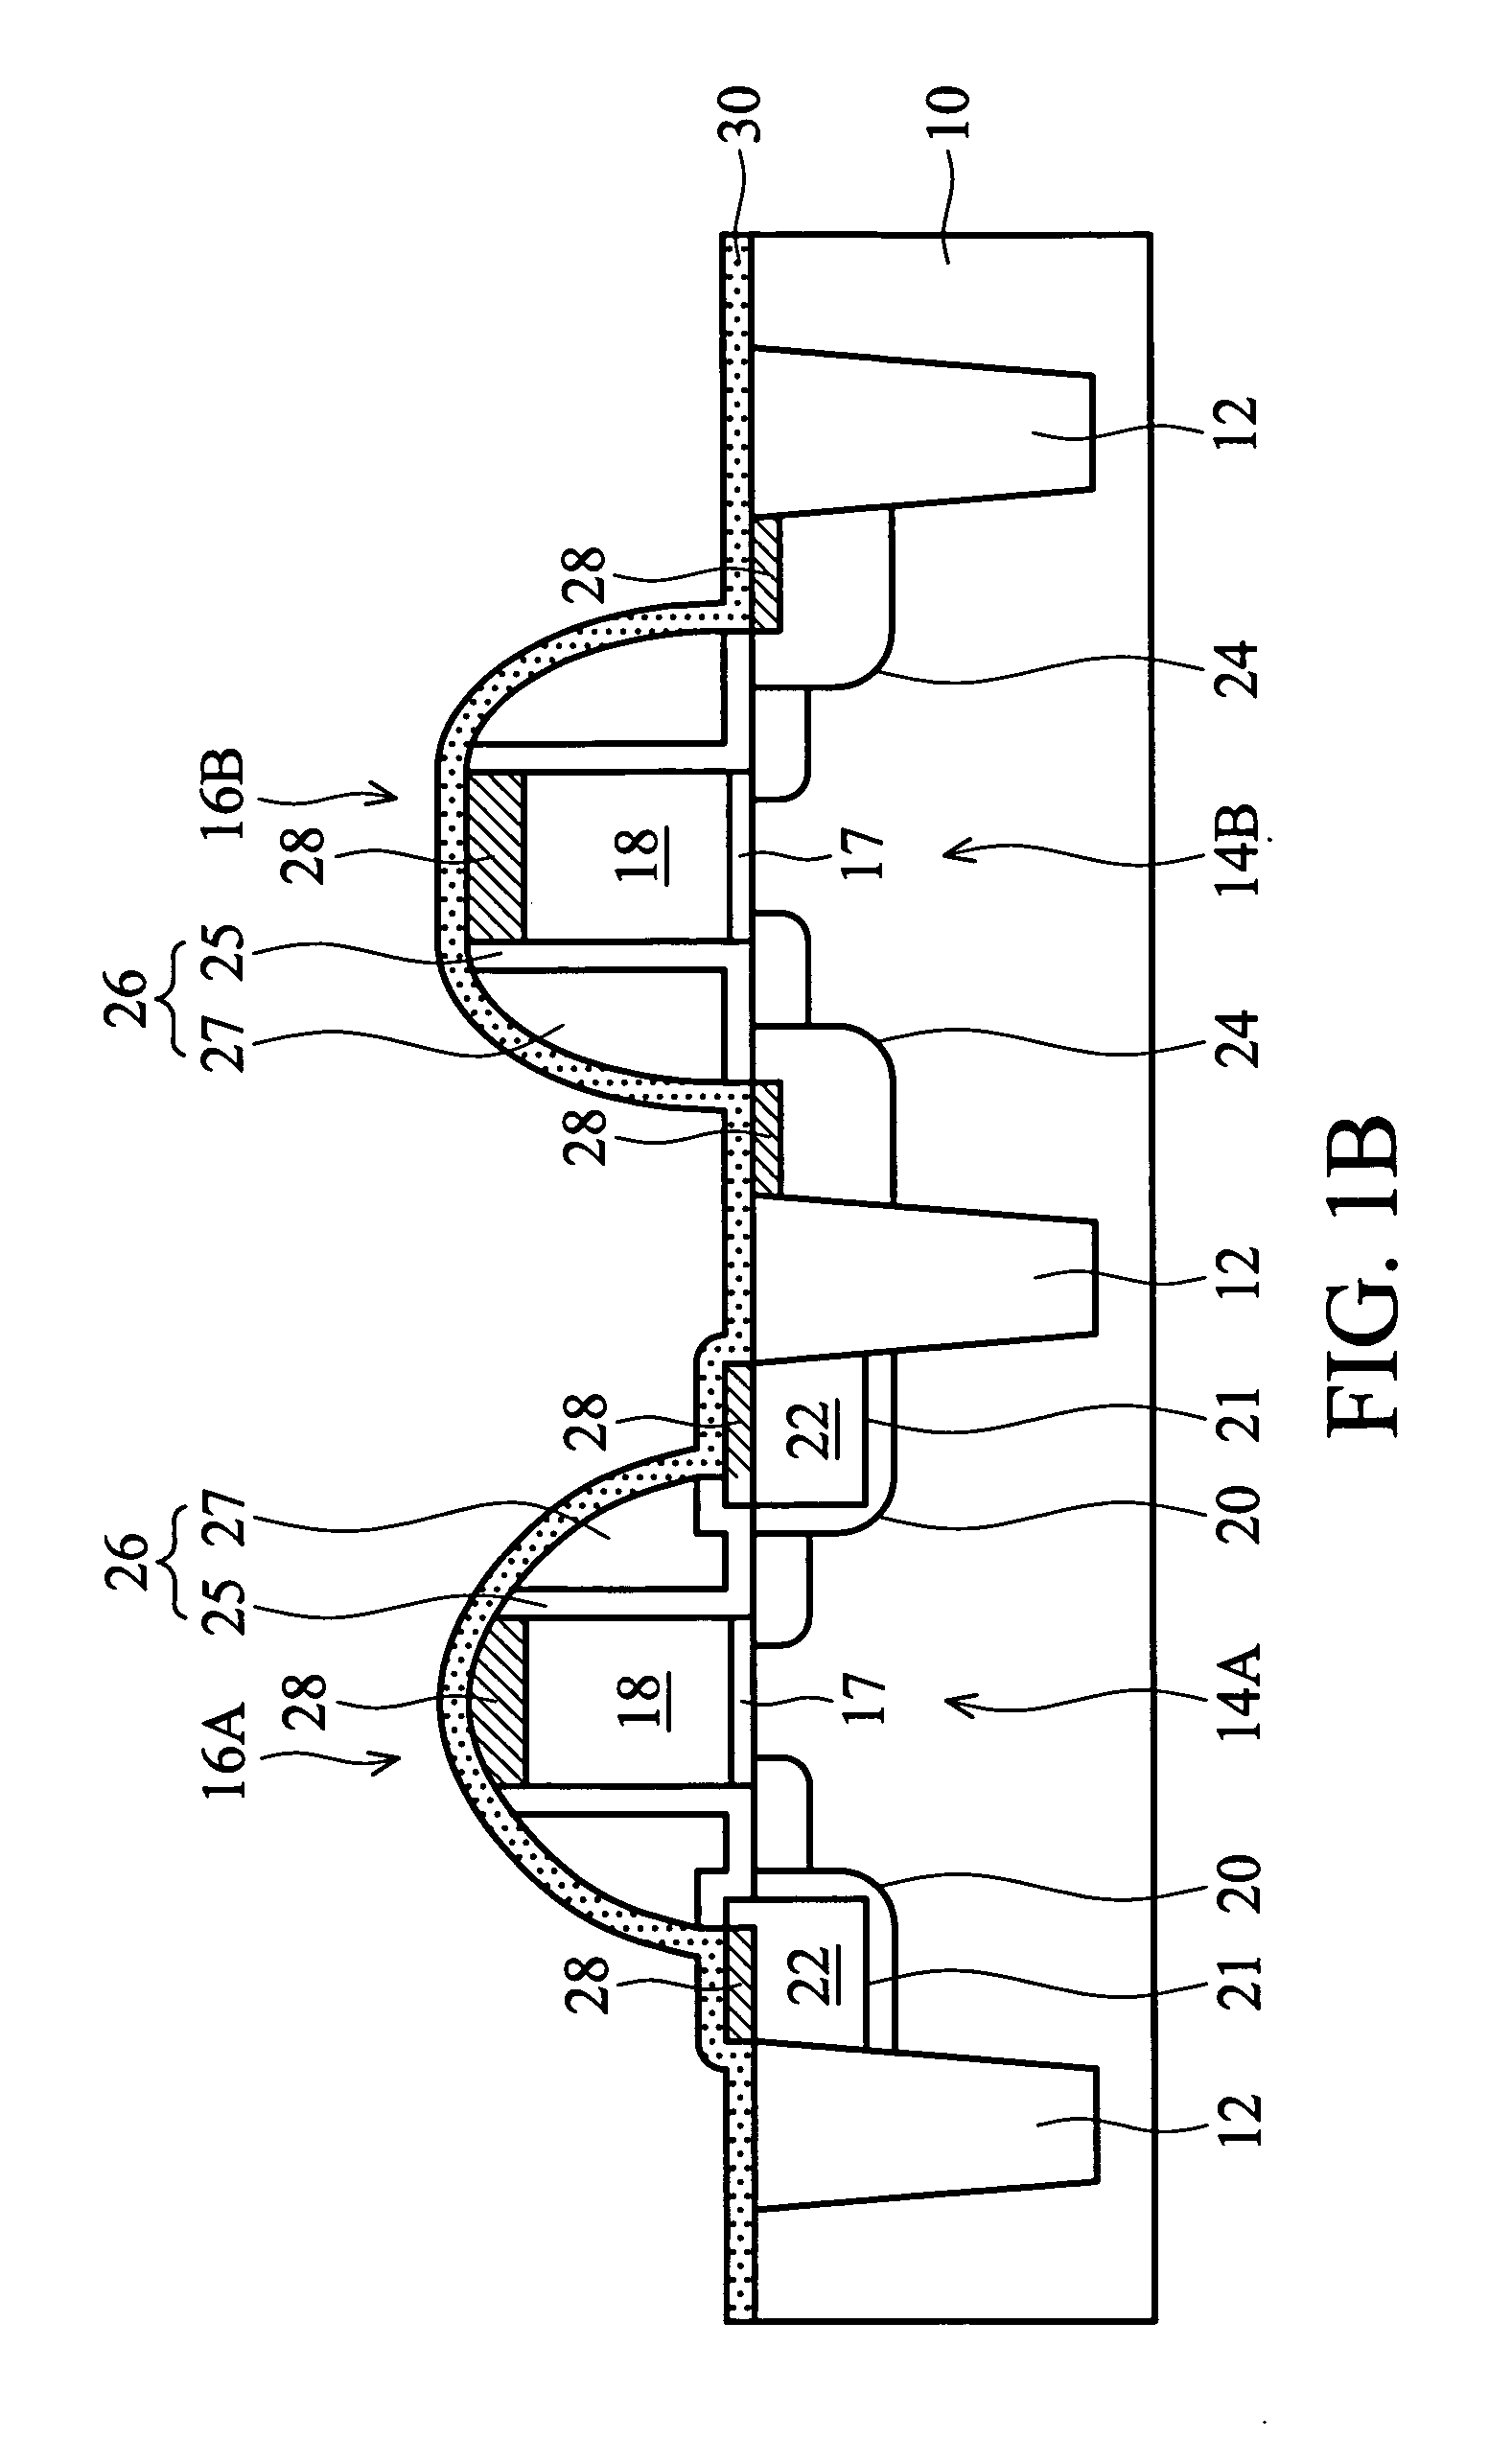 Strain enhanced CMOS architecture with amorphous carbon film and fabrication method of forming the same